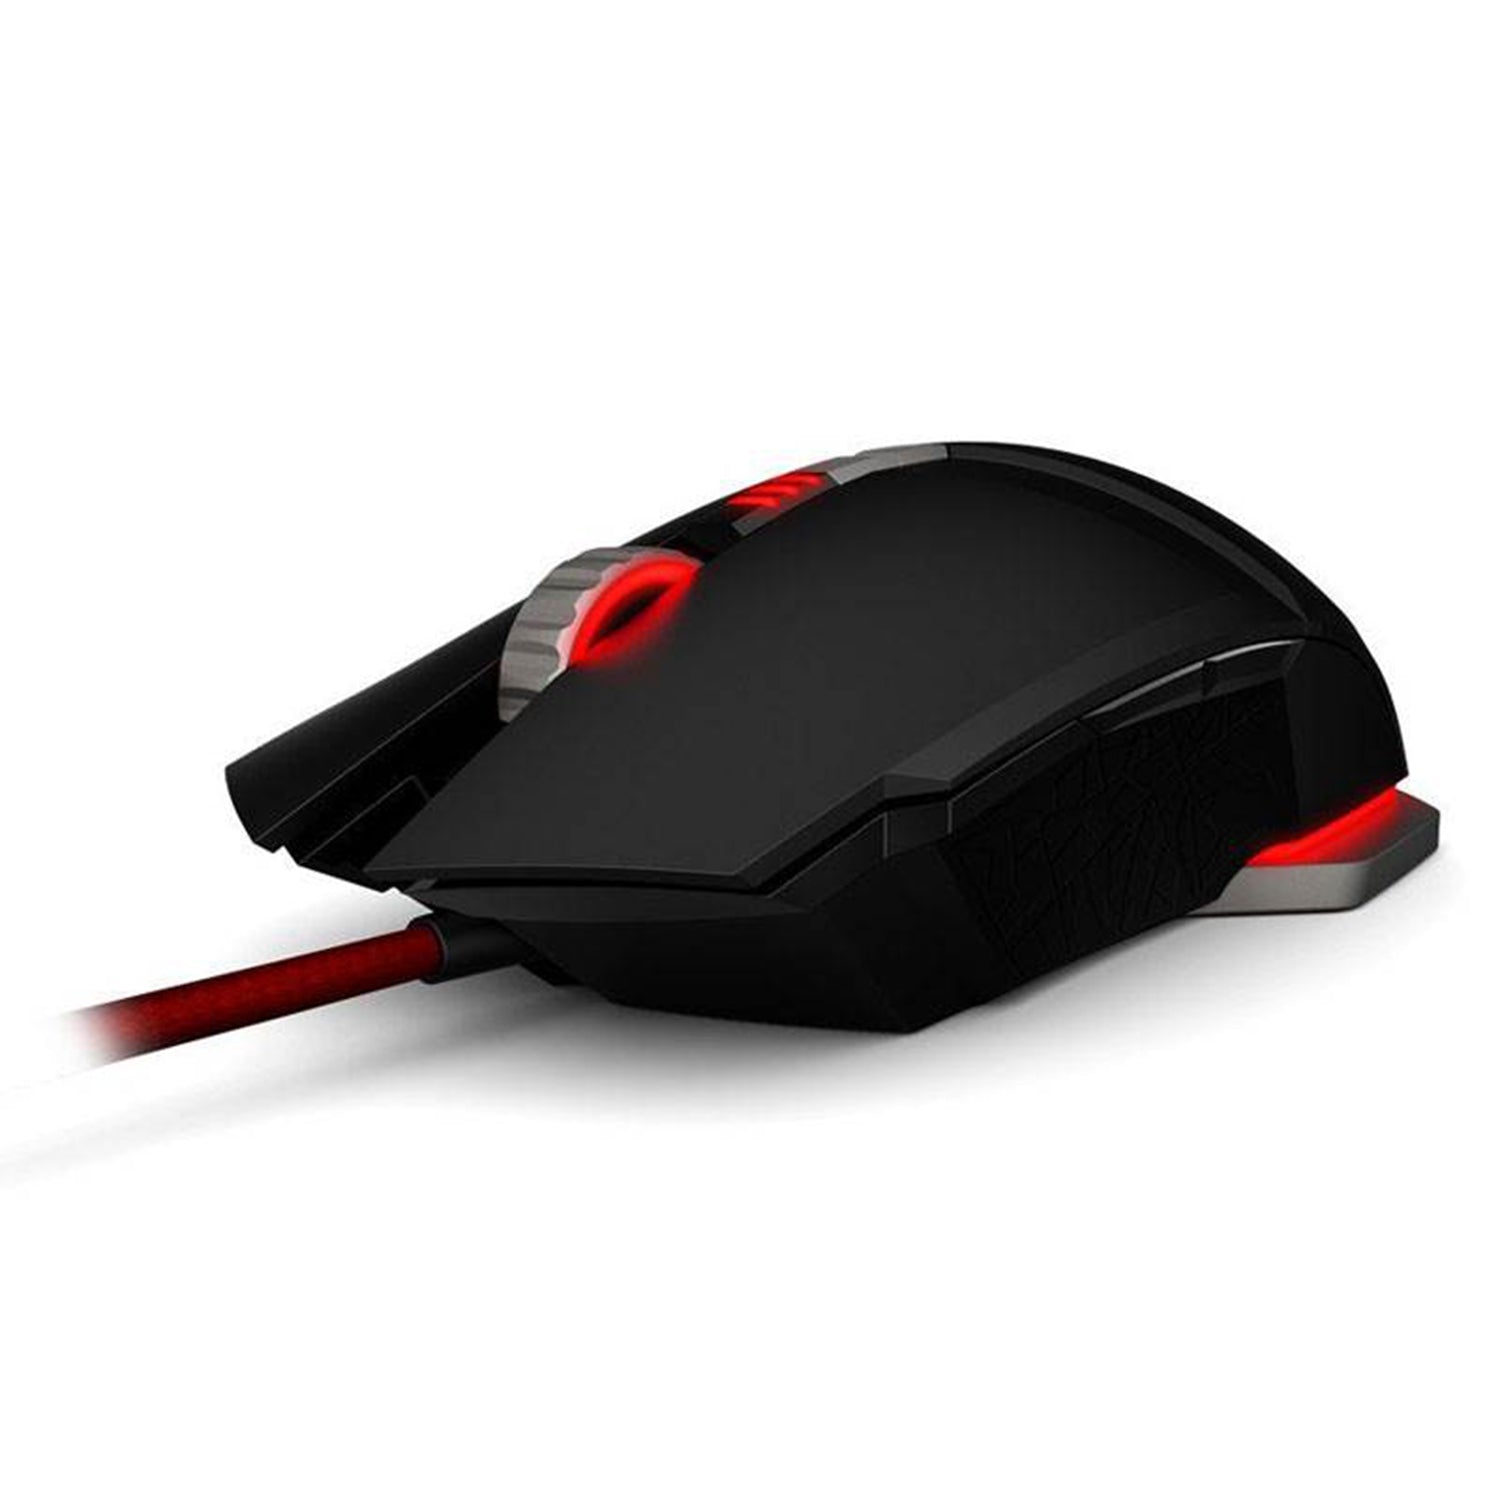 Division Zero M50 Pro Gaming Mouse by Das Keyboard DKDIVZM50GM-NM7